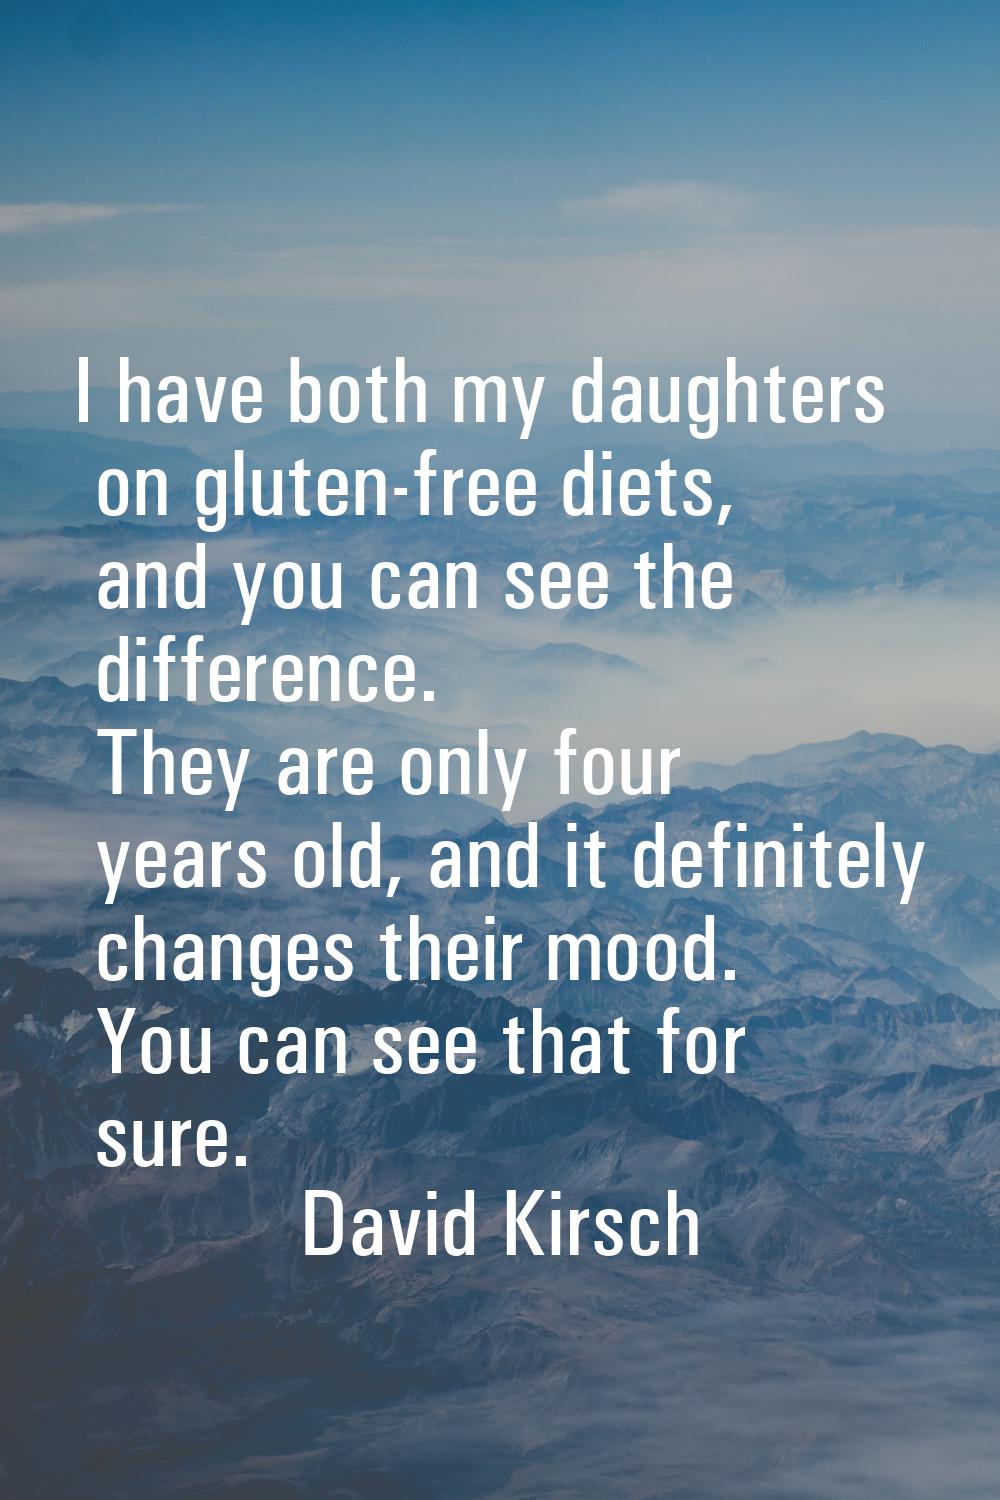 I have both my daughters on gluten-free diets, and you can see the difference. They are only four y